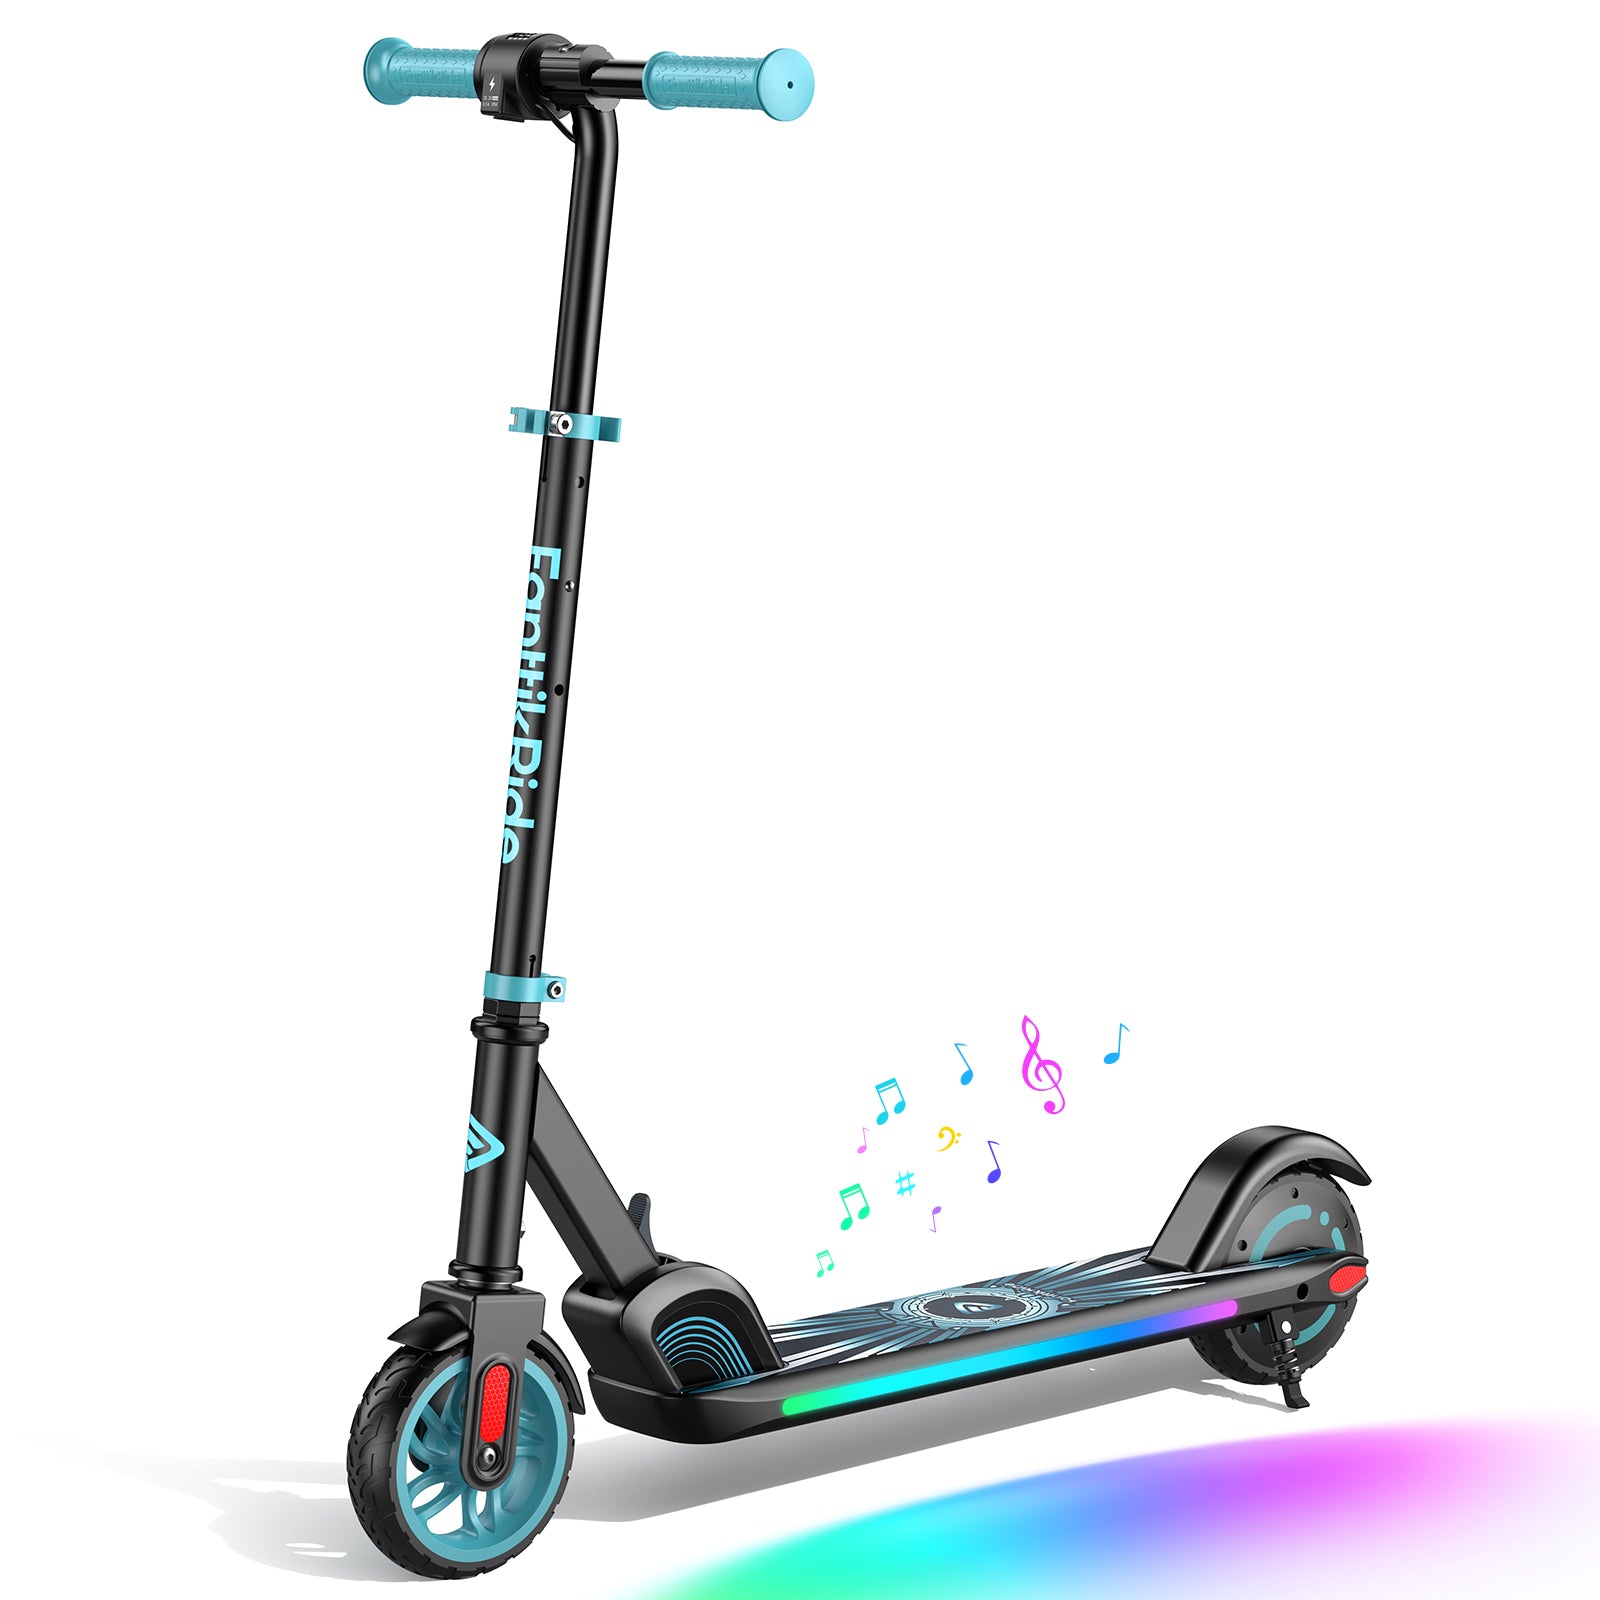 FanttikRide C9 Apex Electric Scooter for Kids Ages 8-12, Bluetooth Music Speaker, Colorful Rainbow Lights, 5/8/10MPH, 5 Miles Range, Adjustable Height, Foldable, Gift for Teens up to 132 lbs,